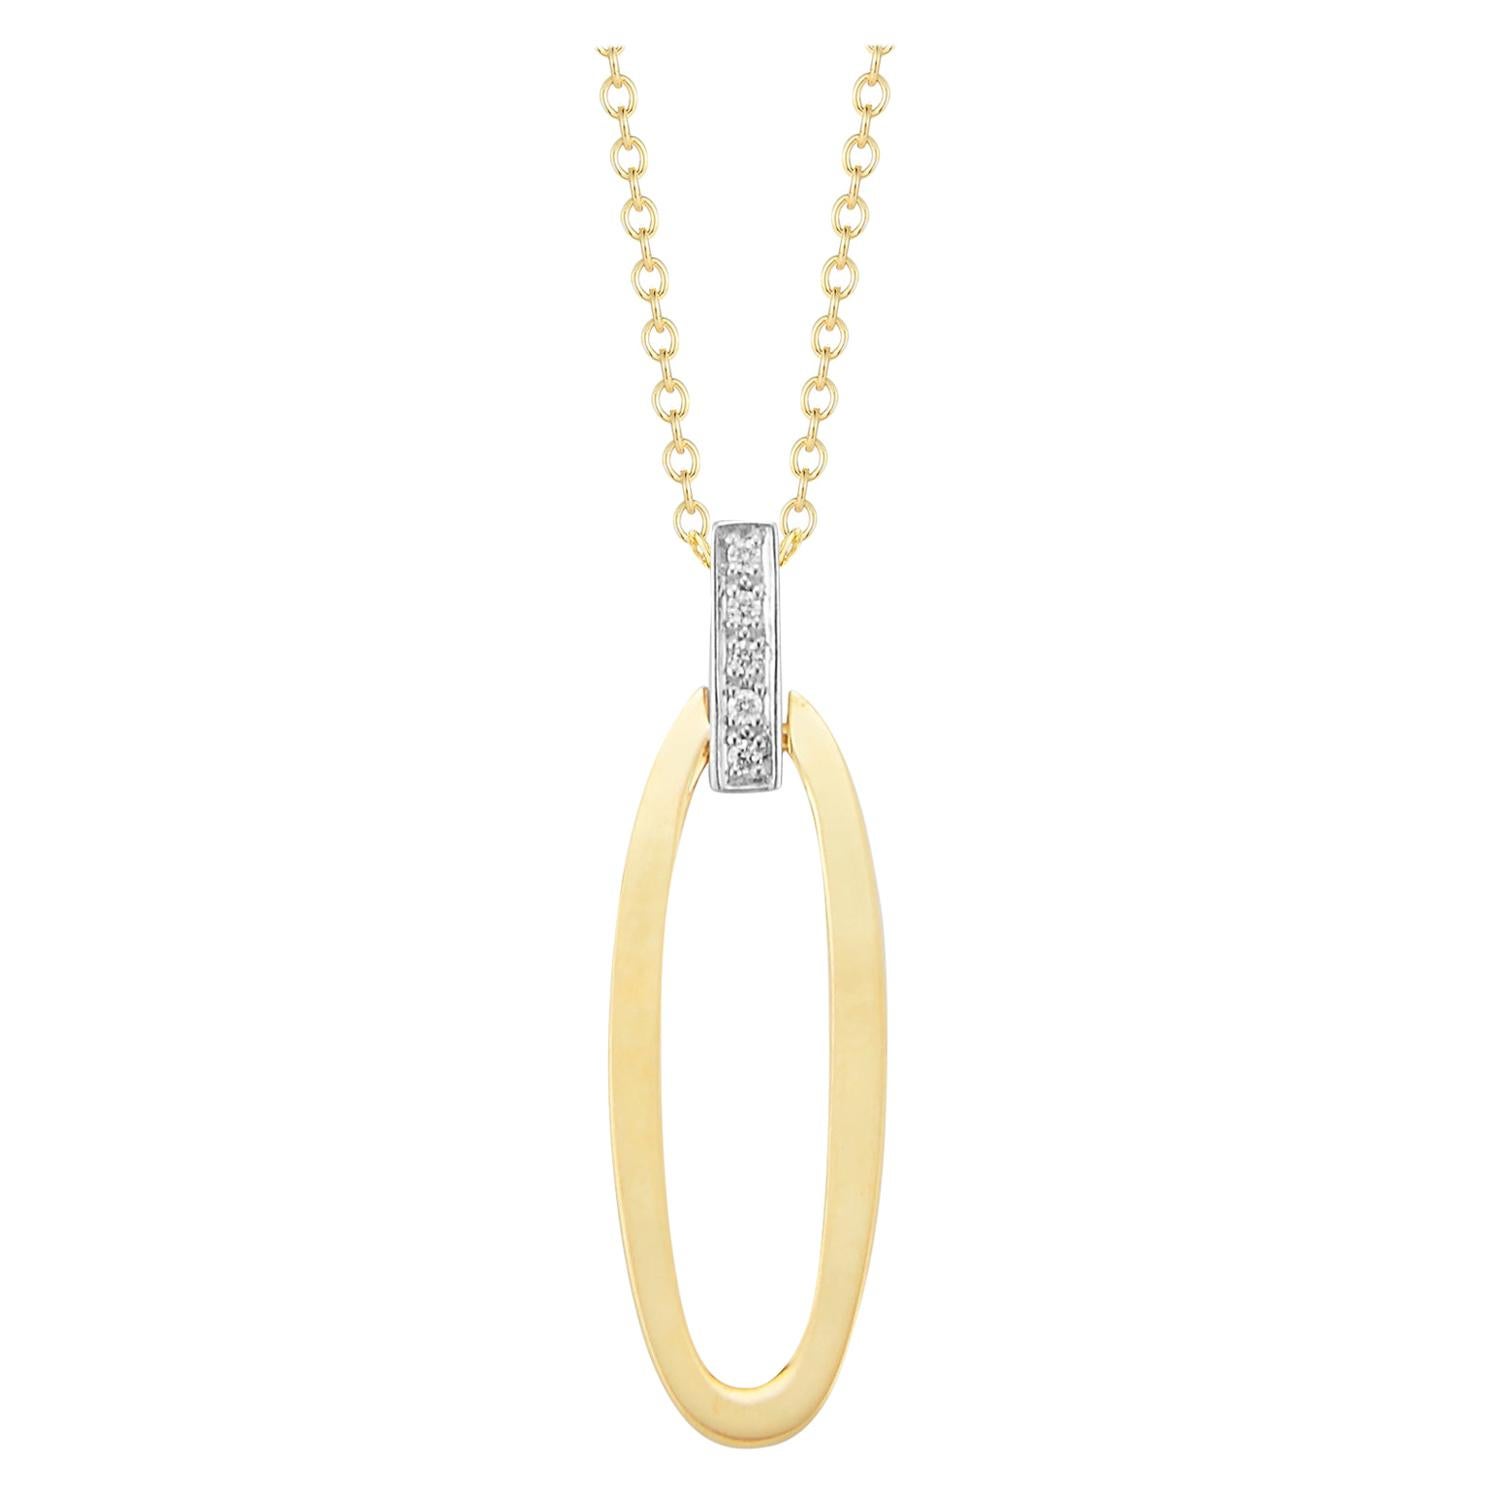 Handcrafted 14 Karat Yellow Gold Open Oval Pendant